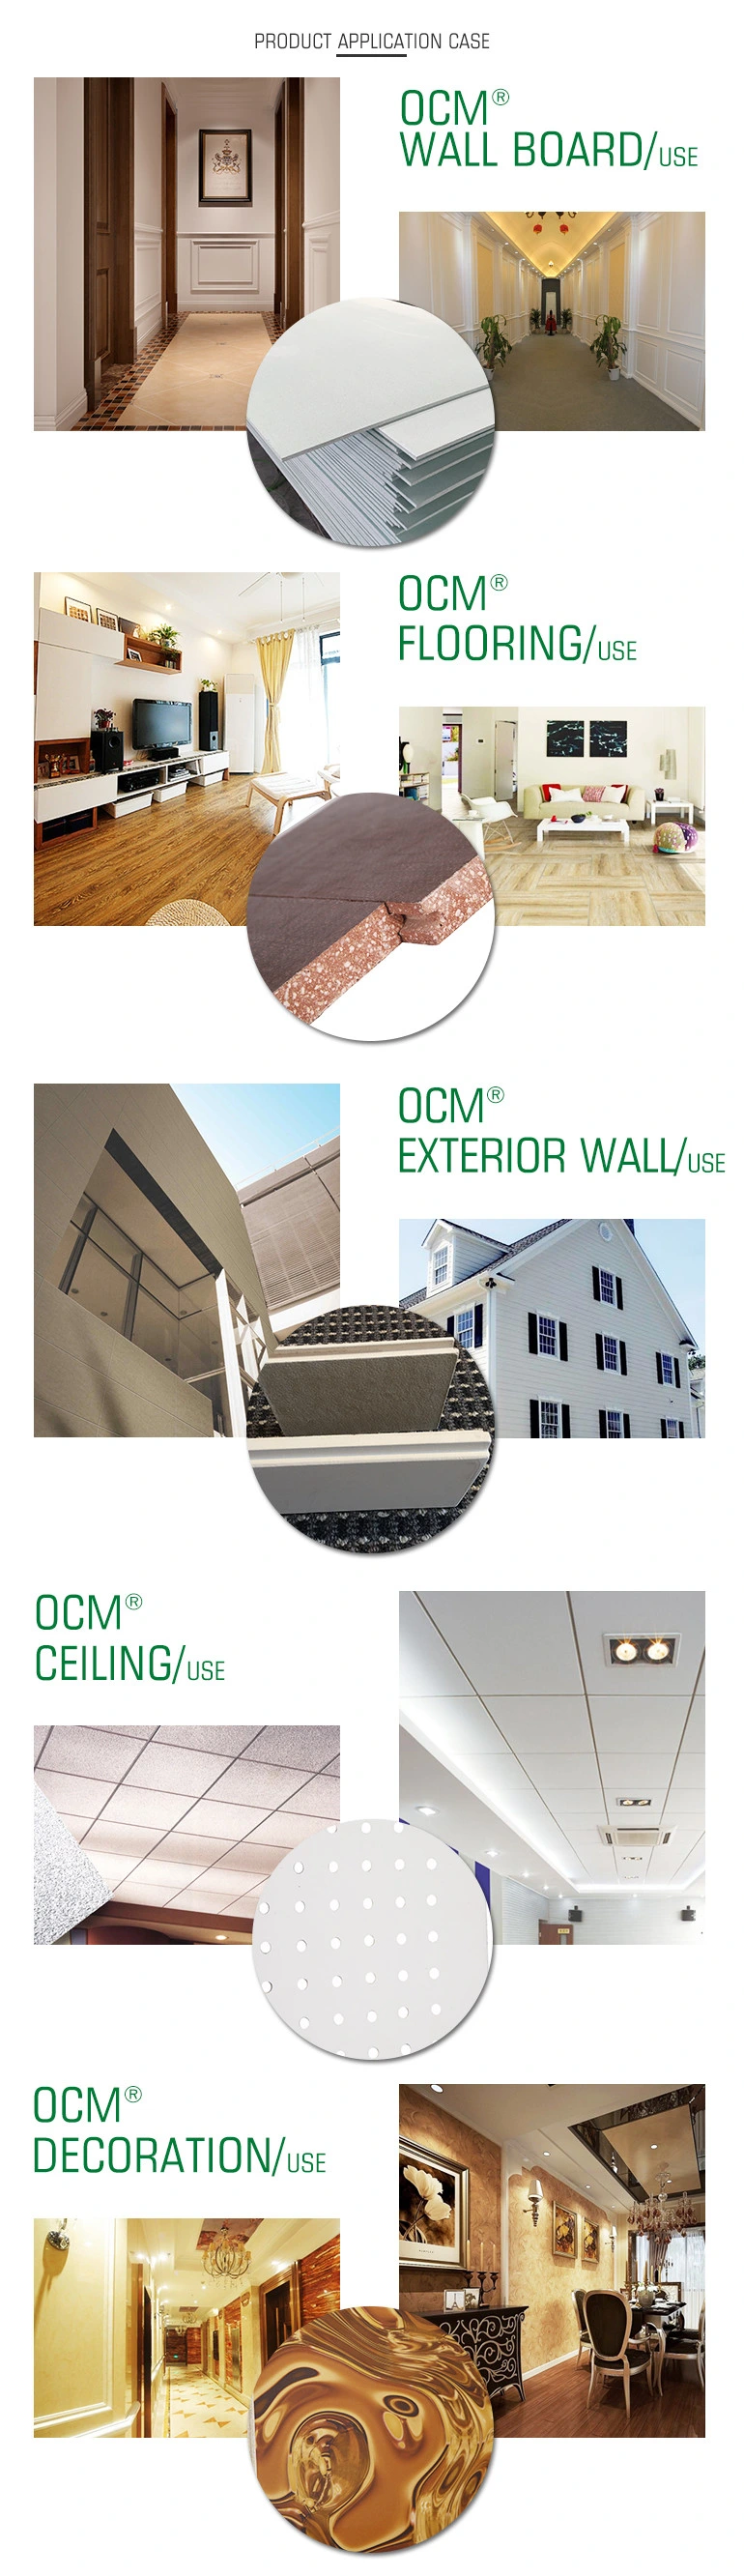 Wholesale Supplier Fire Retardant Material Fireproof Sand Magnesium Sulfate Wall Panel Fire Resistant MGO Boards